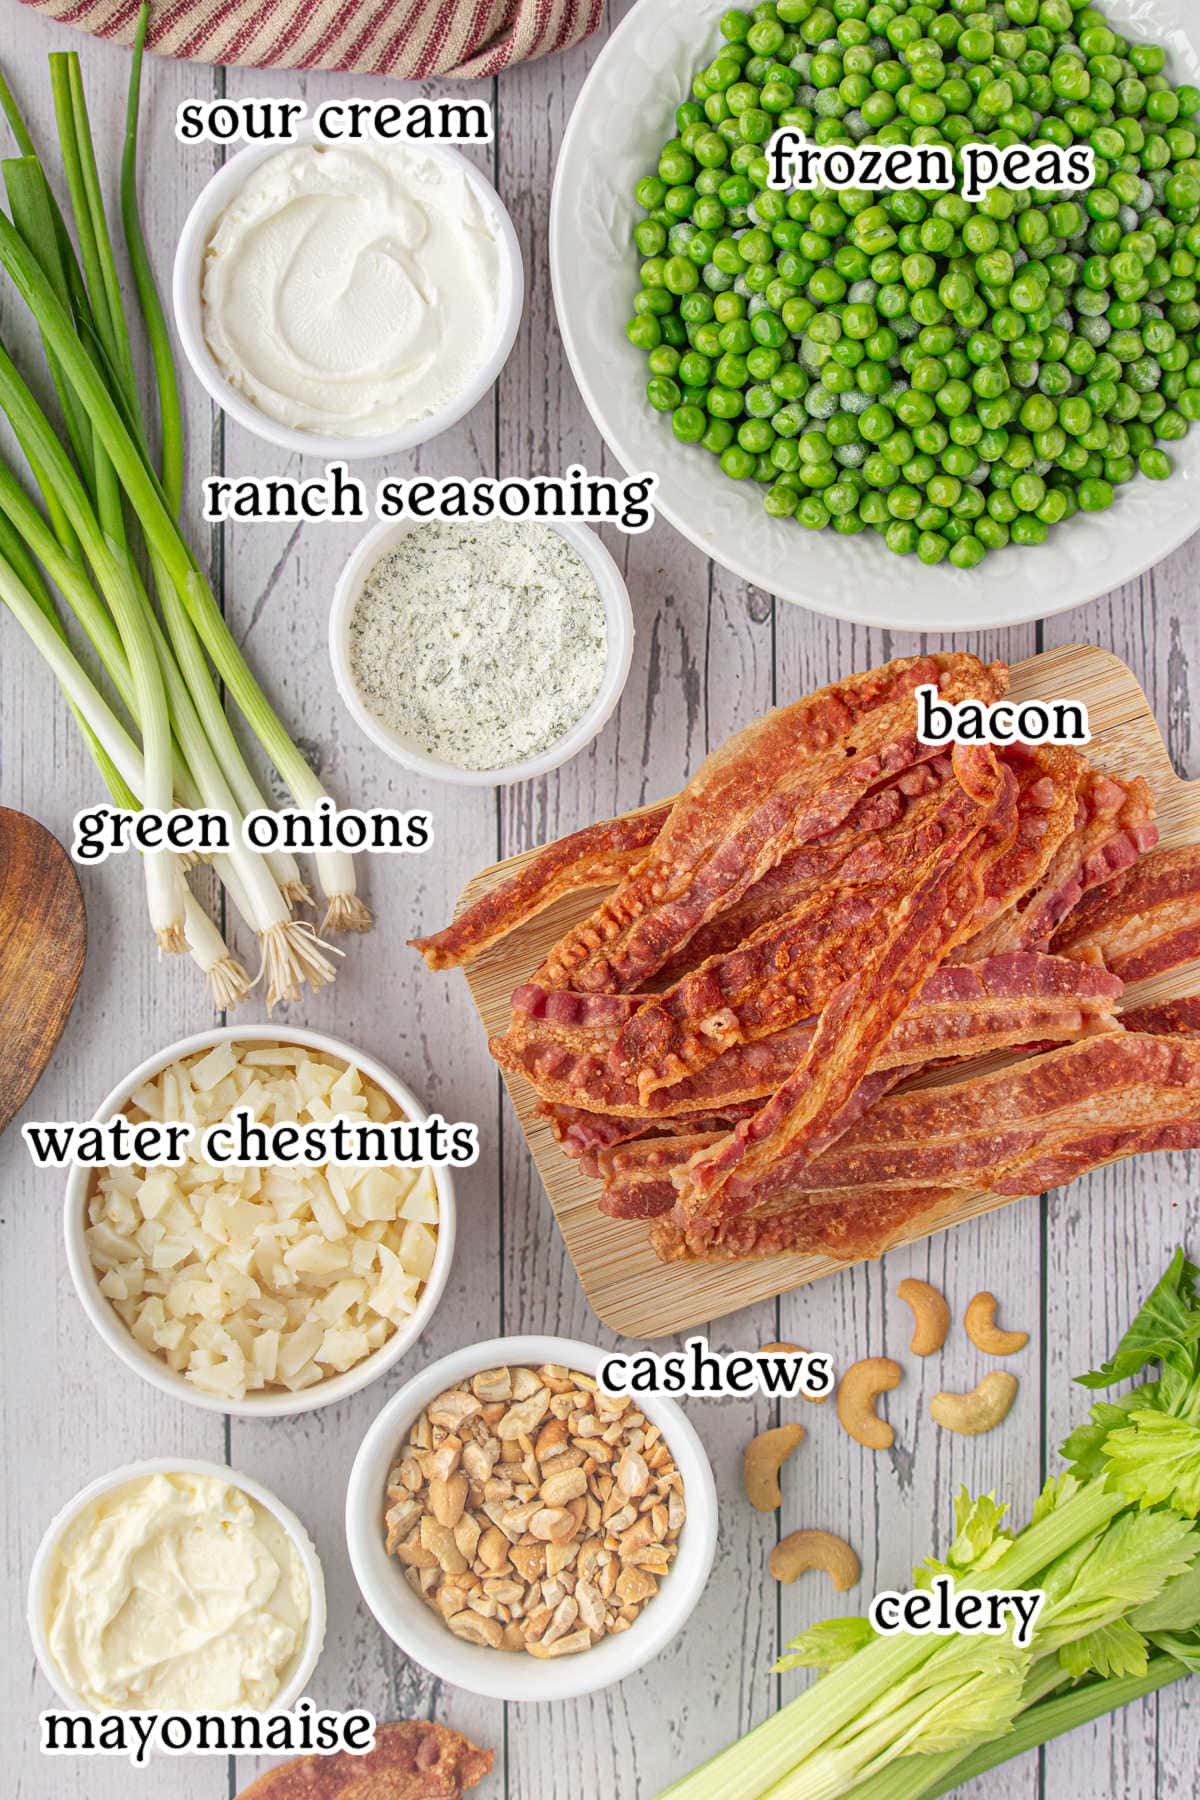 Labeled ingredients for this recipe on a white table.